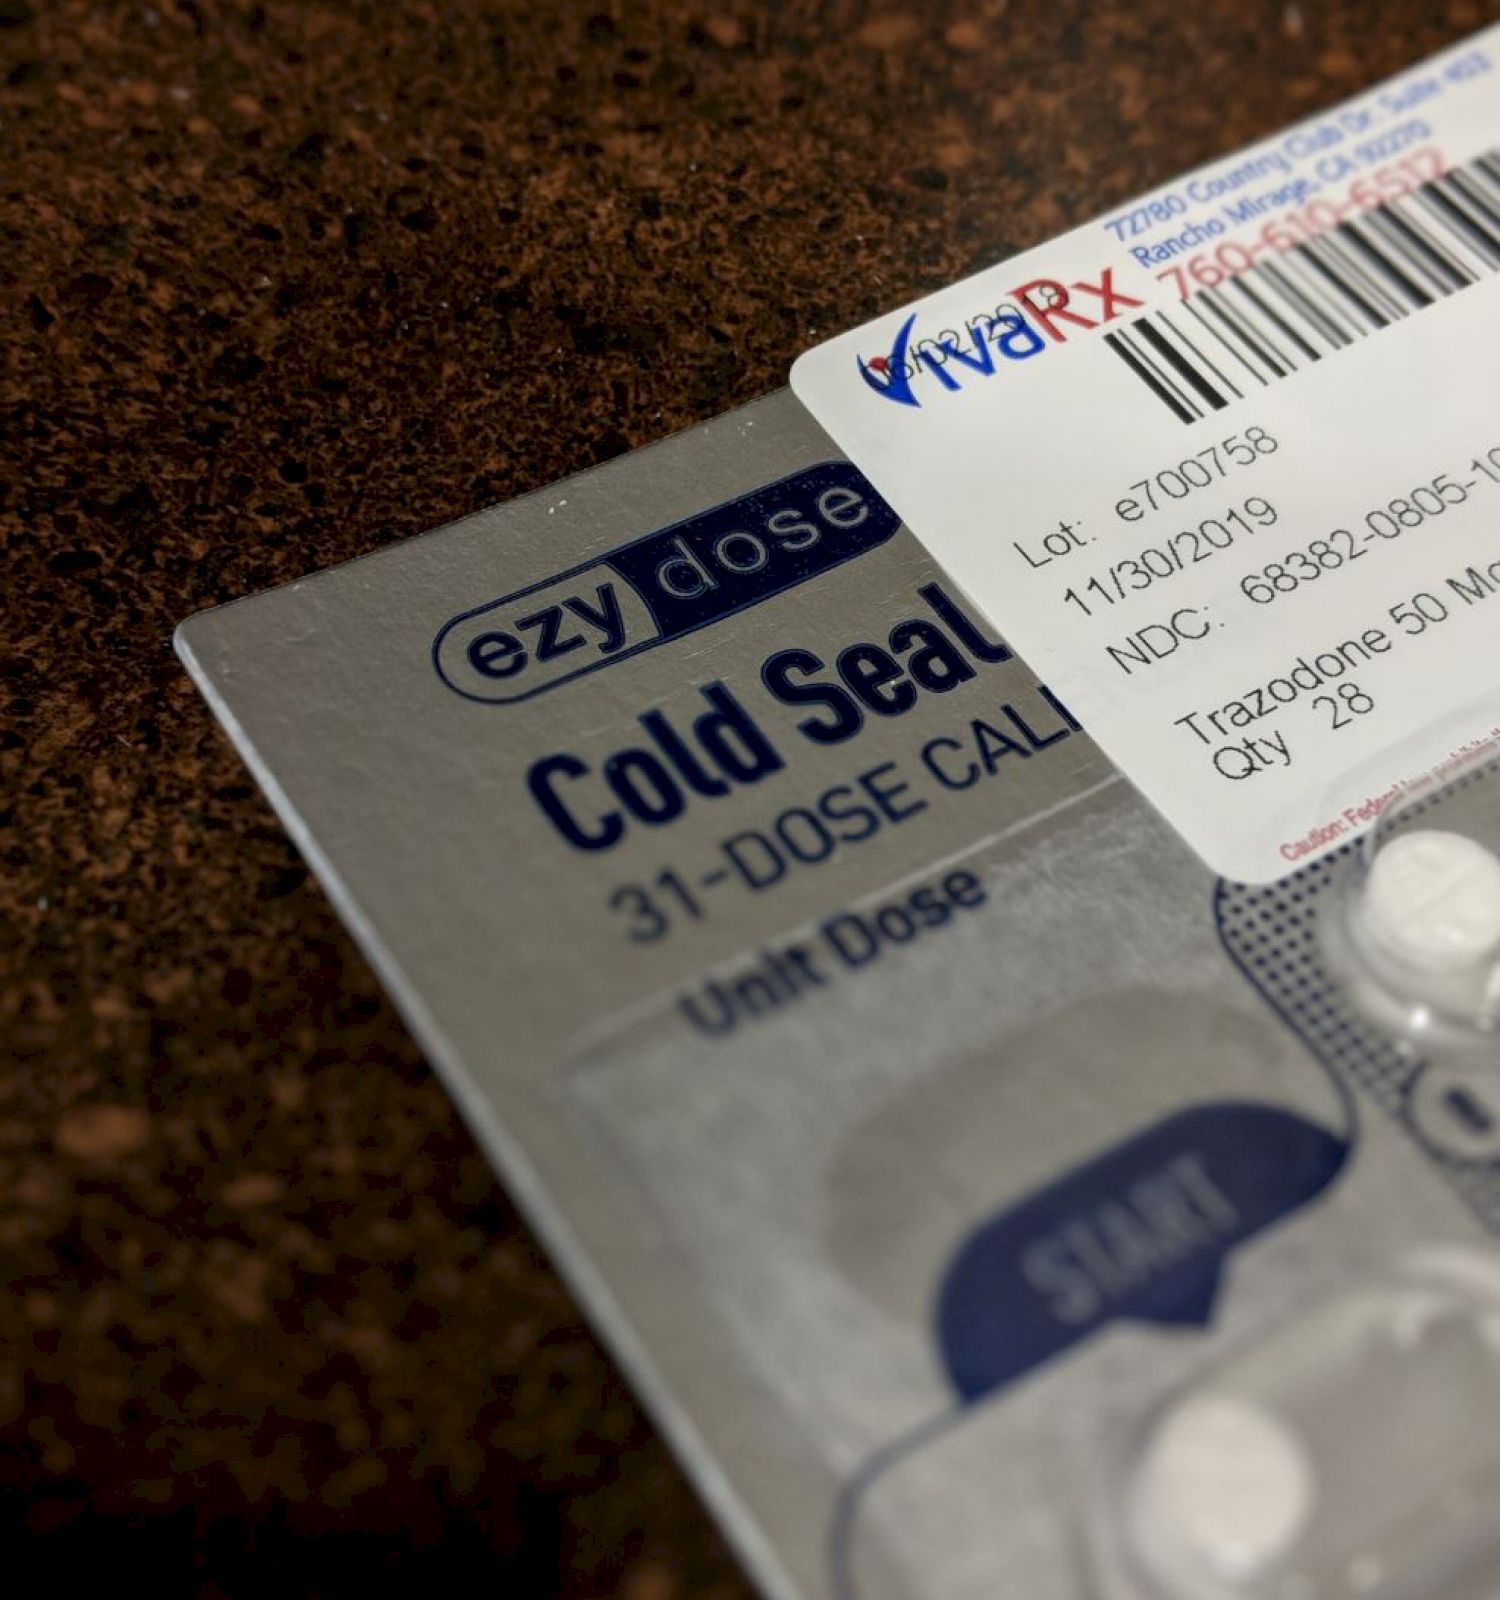 The image shows packaging for cold seal medications, with a prescription label partially covering it. There are white pills in the blister pack.